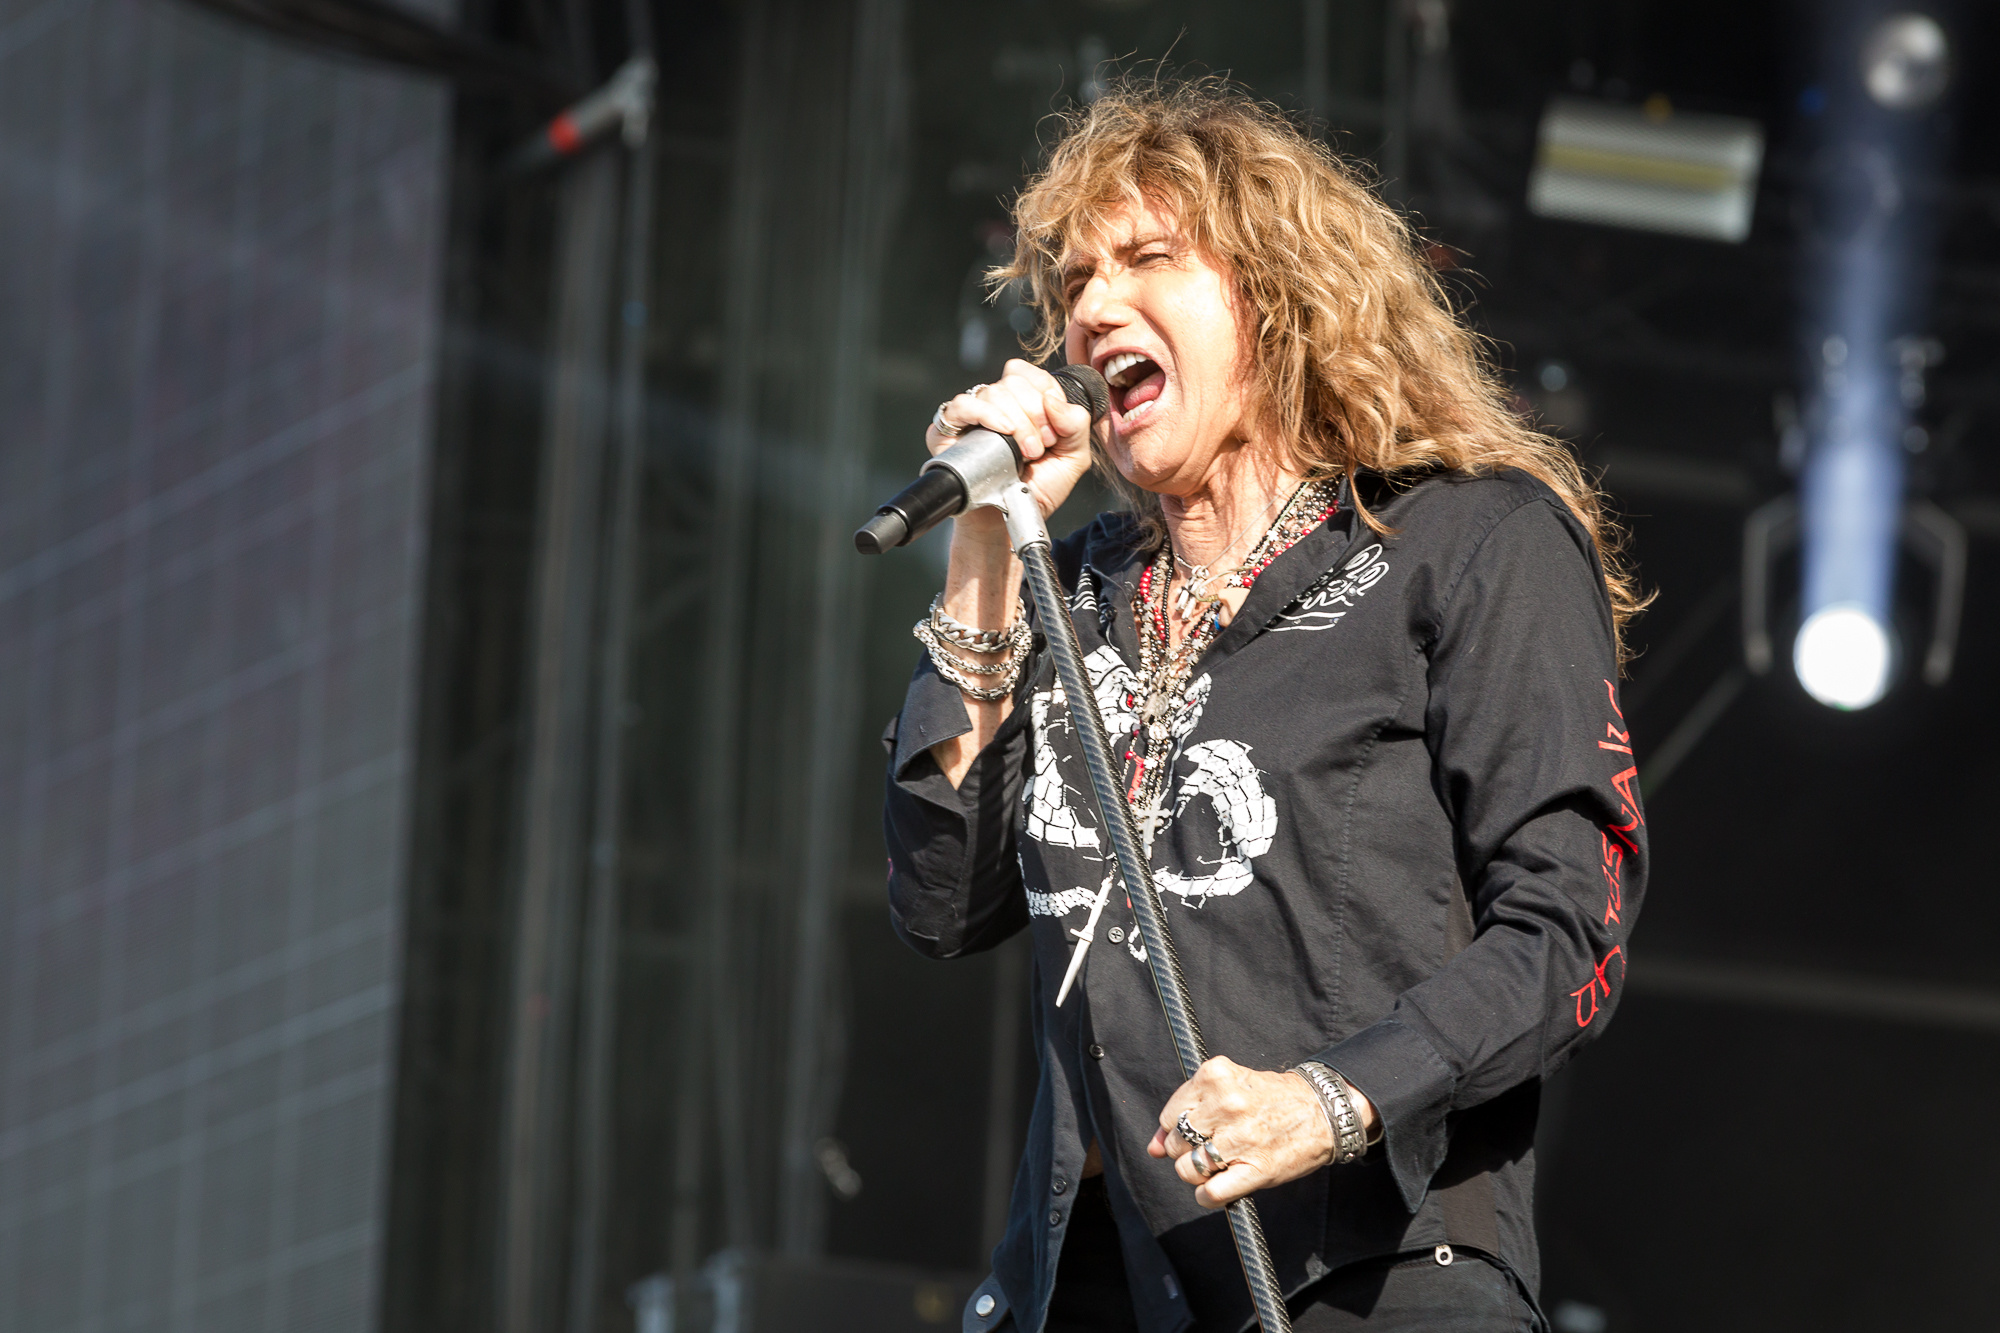 David Coverdale, Whitesnake without him, Live performance, Rocking the stage, 2000x1340 HD Desktop